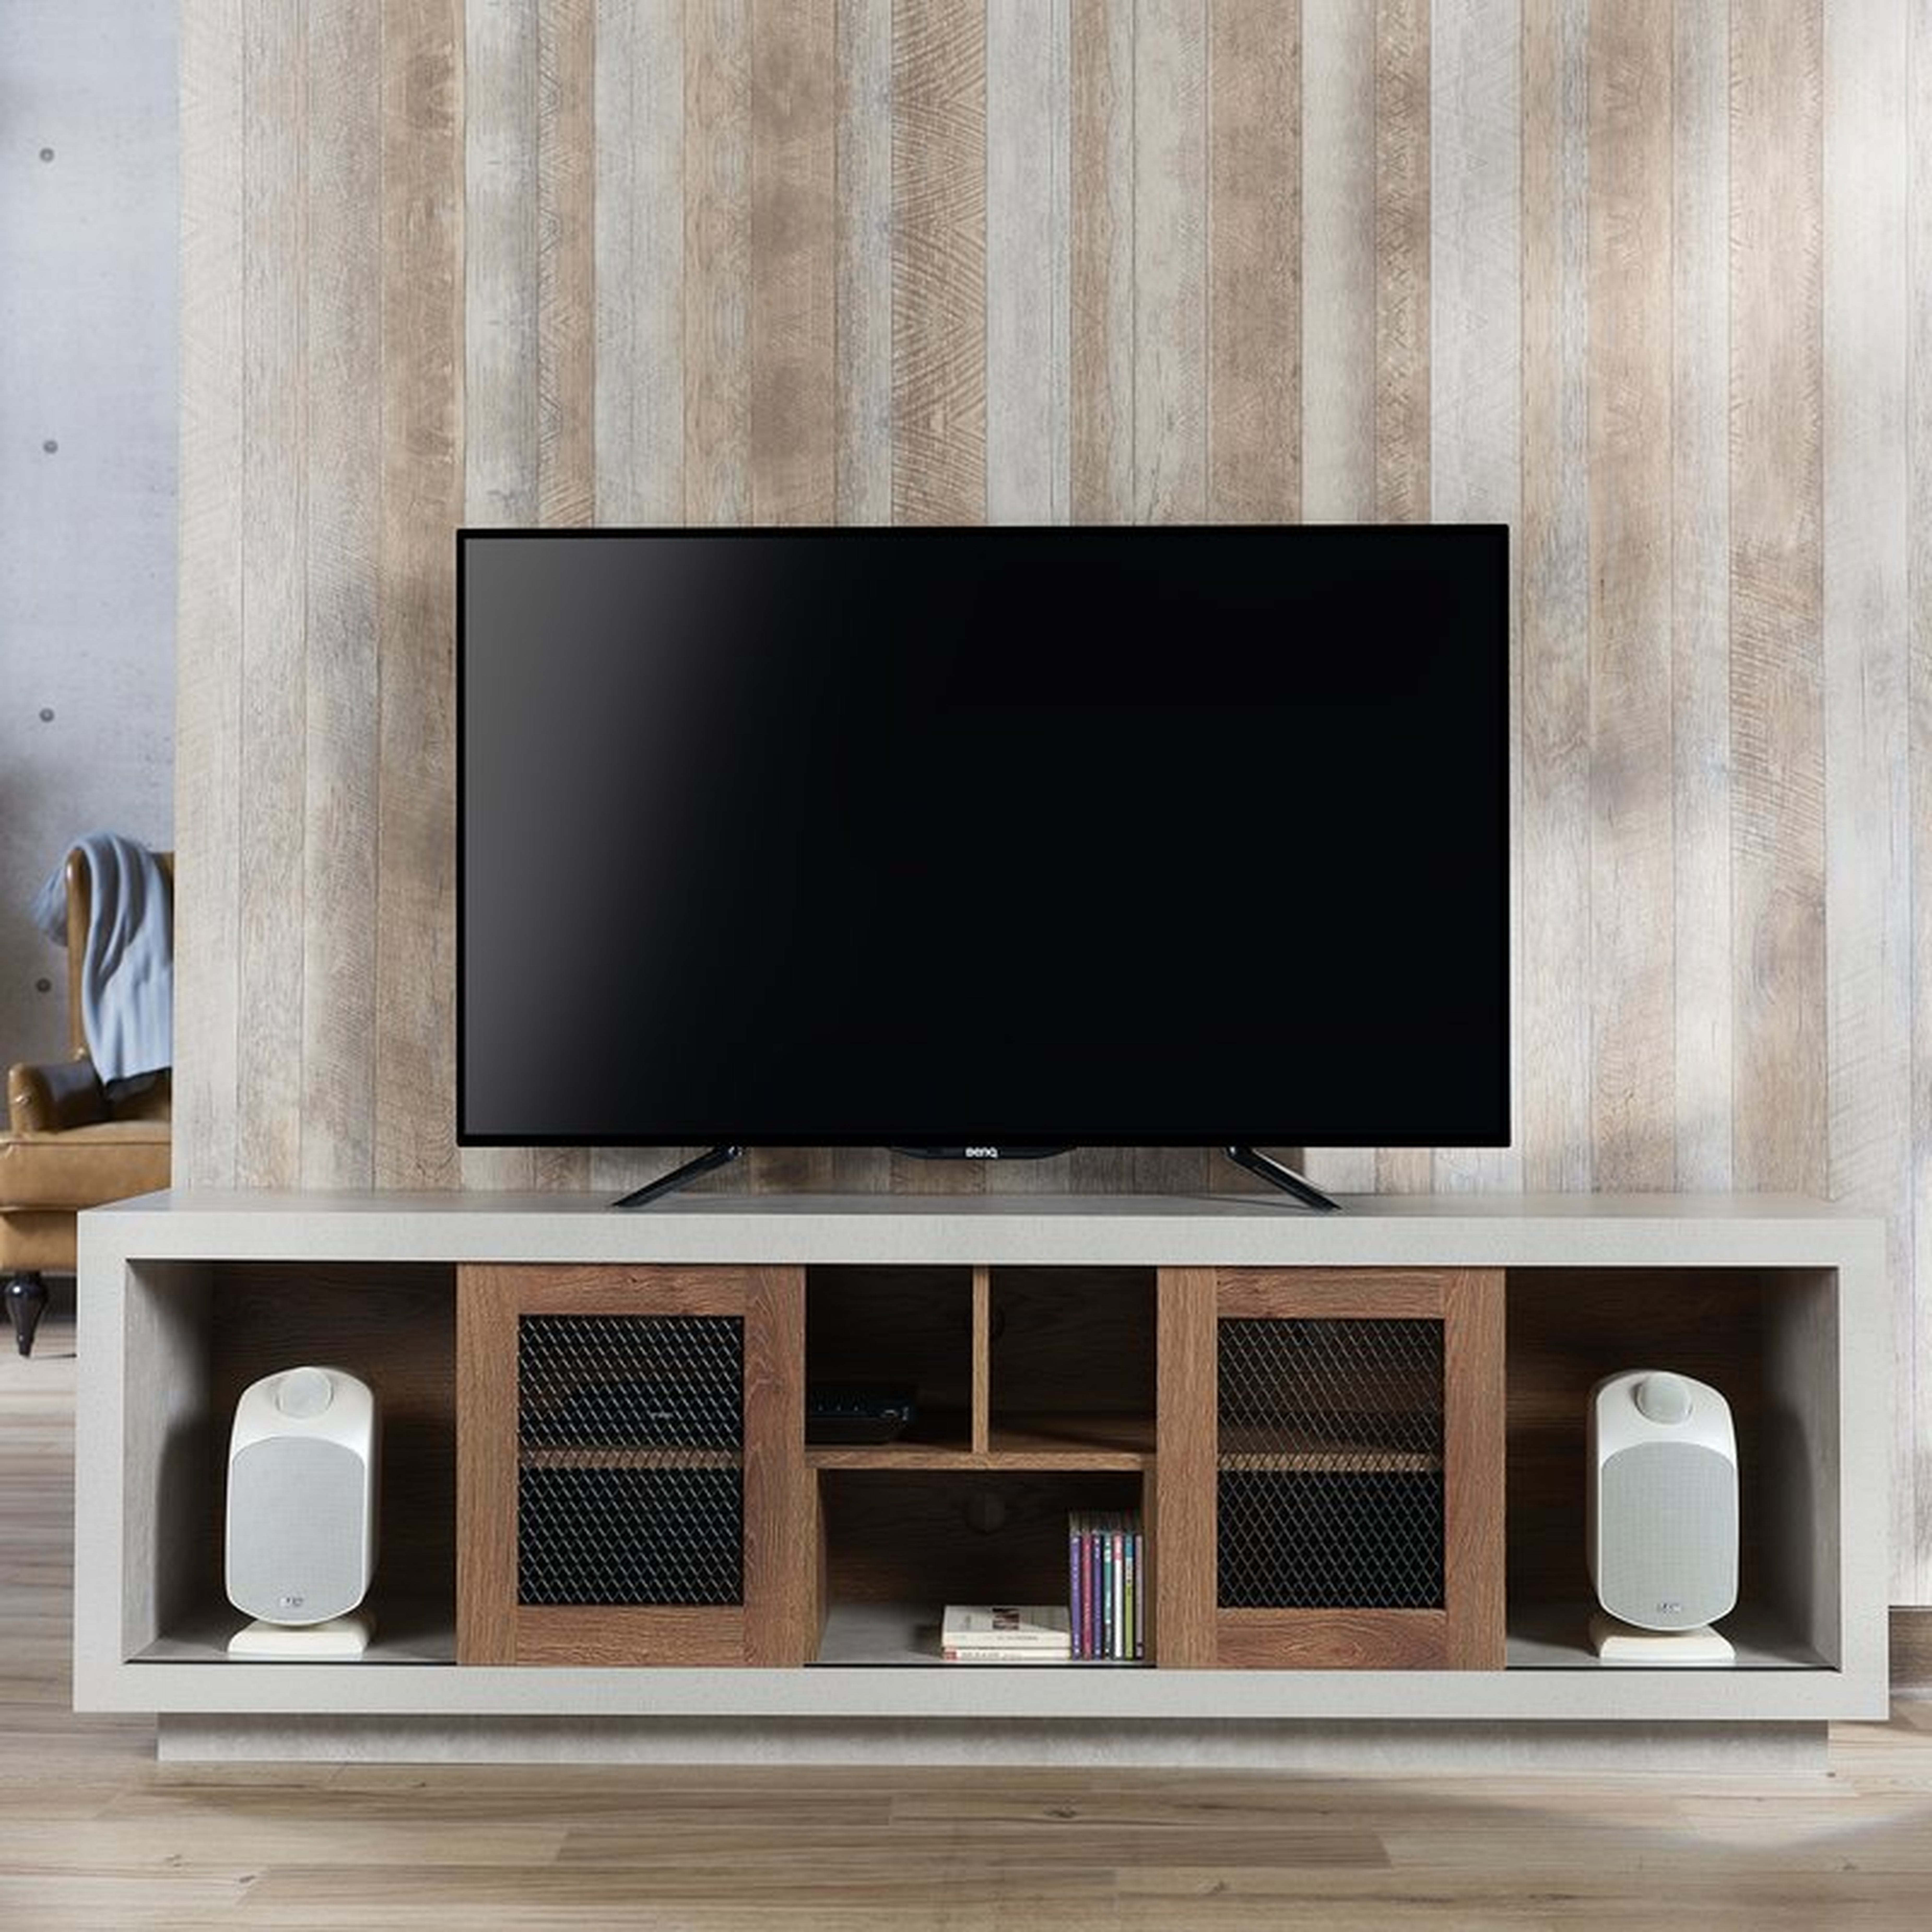 Cioffi Industrial TV Stand for TVs up to 70" - Wayfair